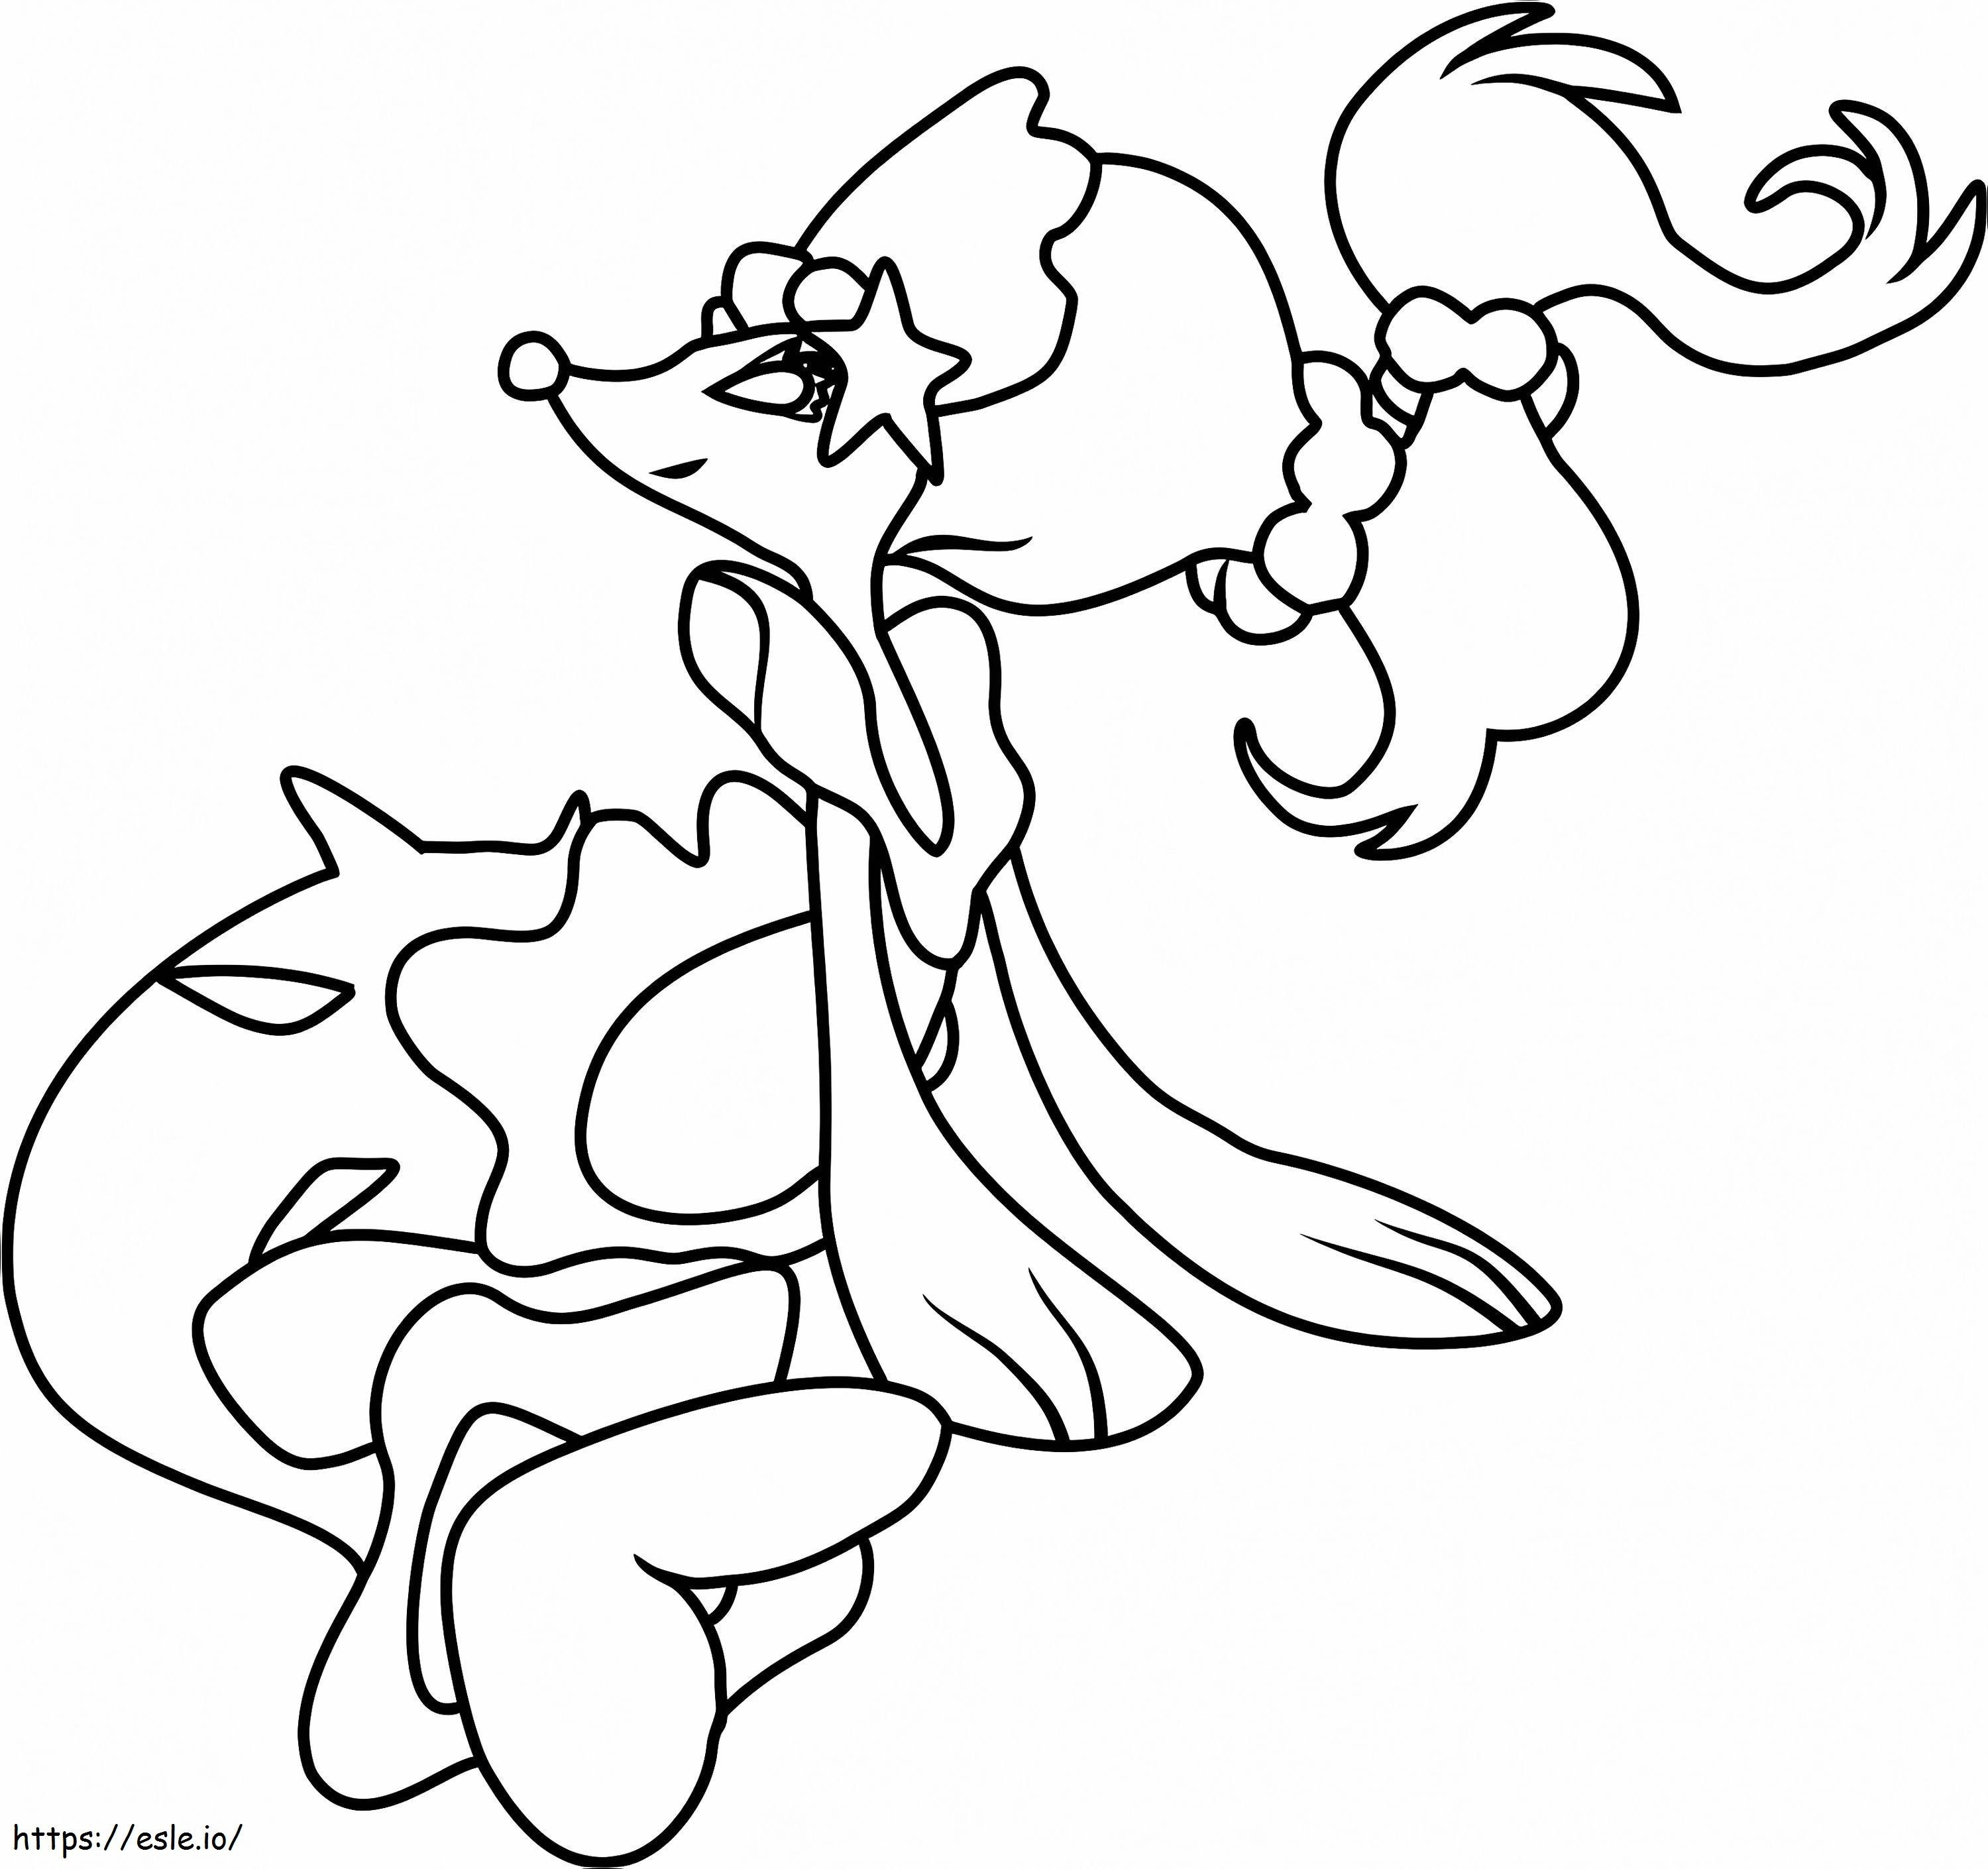 1529613490_2 coloring page